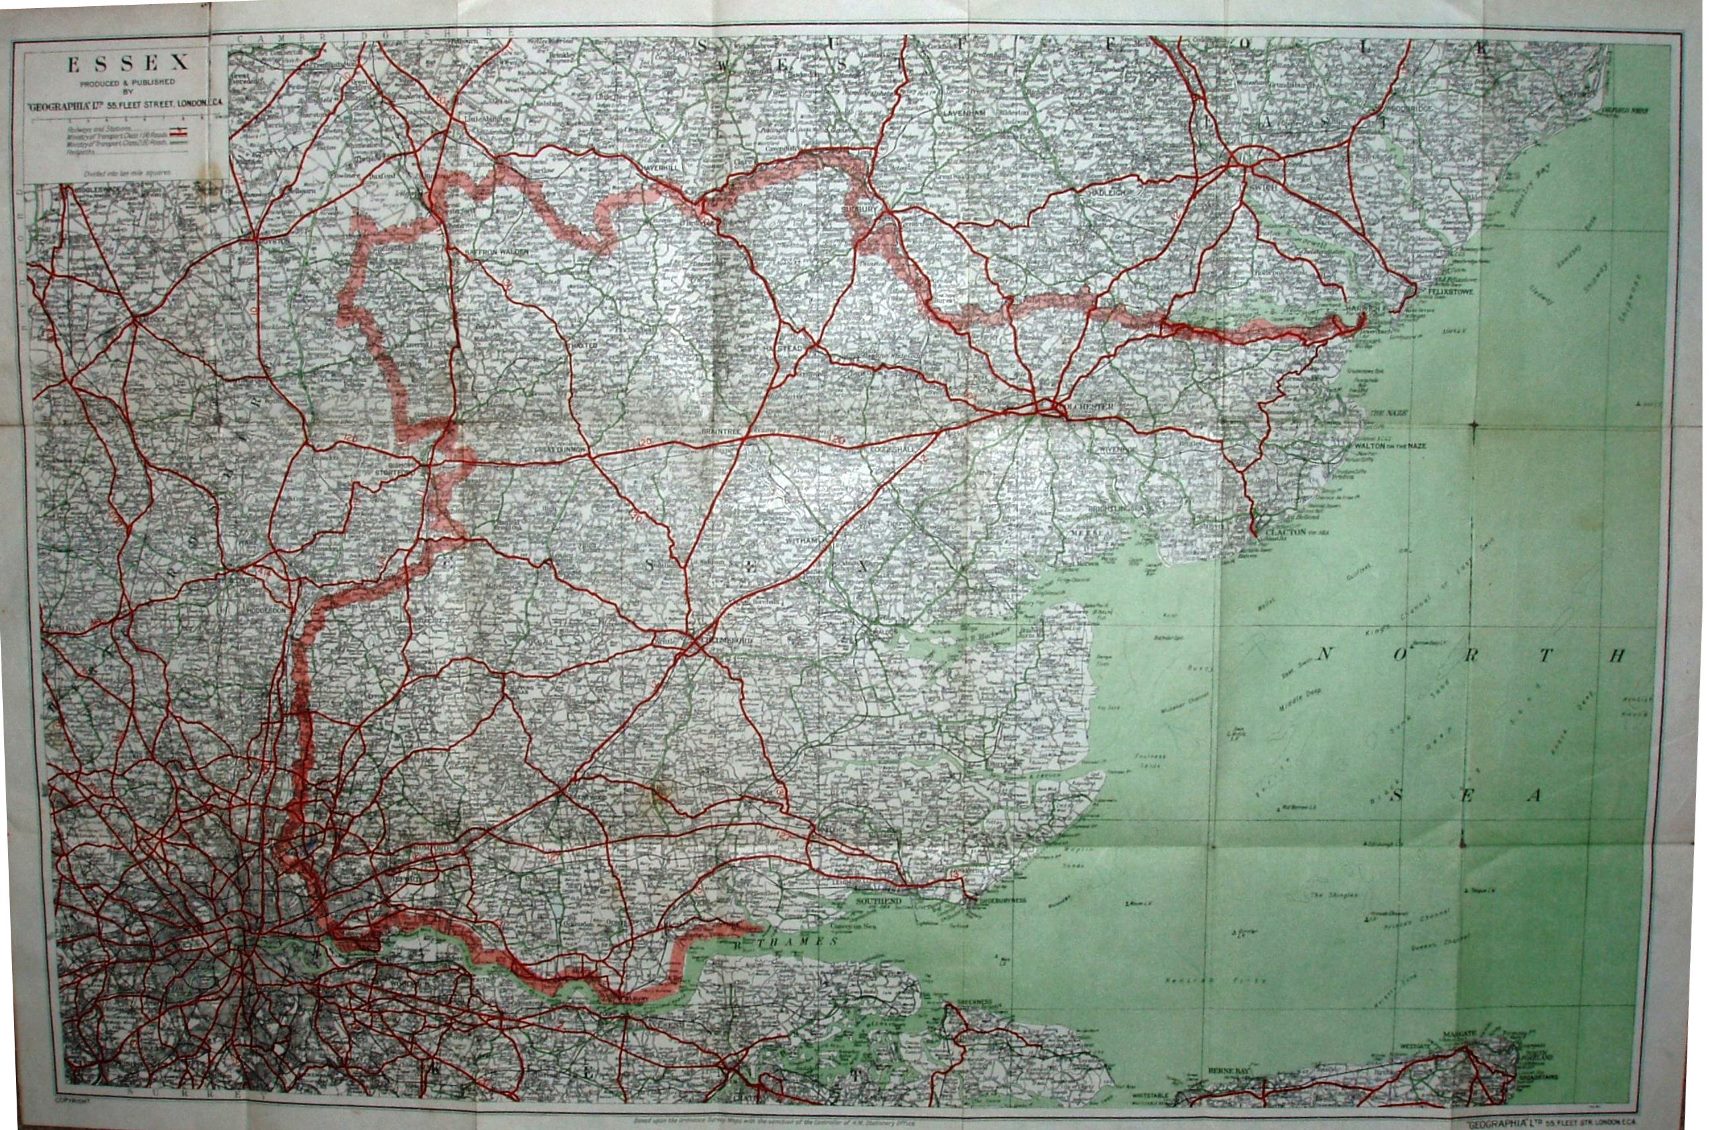 Geographia Large Scale Road Map of Essex, 1937